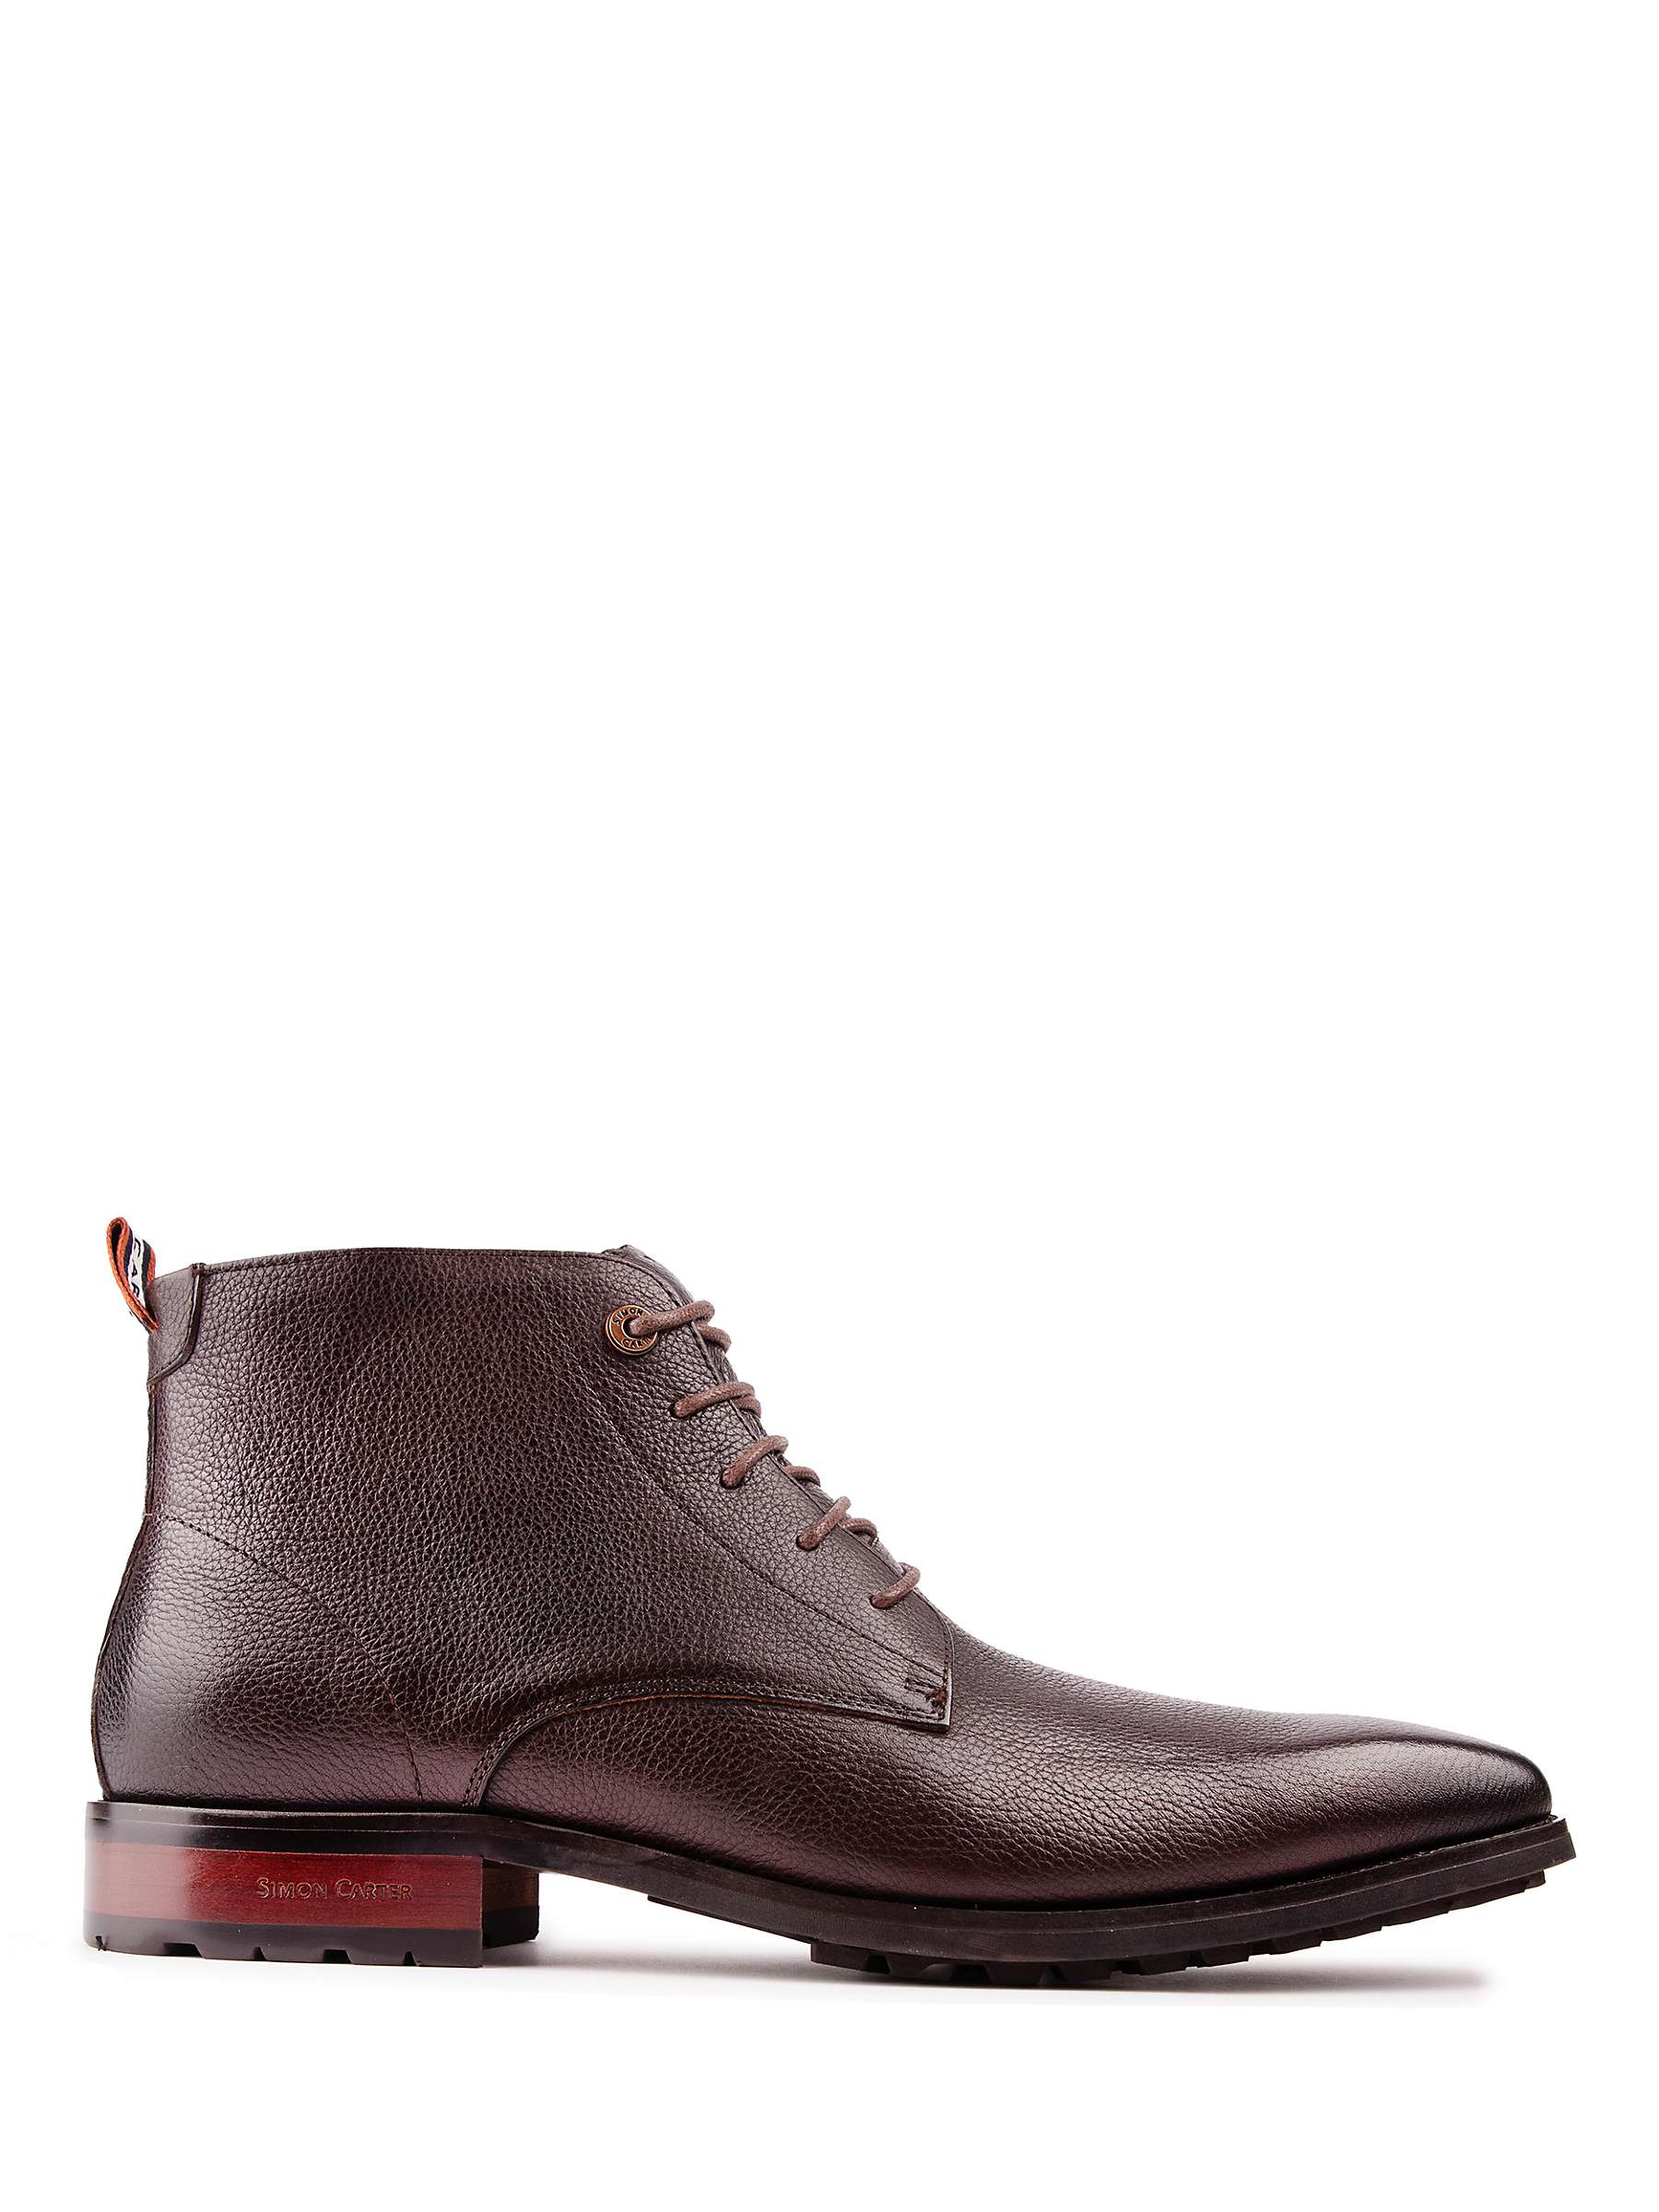 Buy Simon Carter Daisy Leather Chukka Boots, Brown Online at johnlewis.com